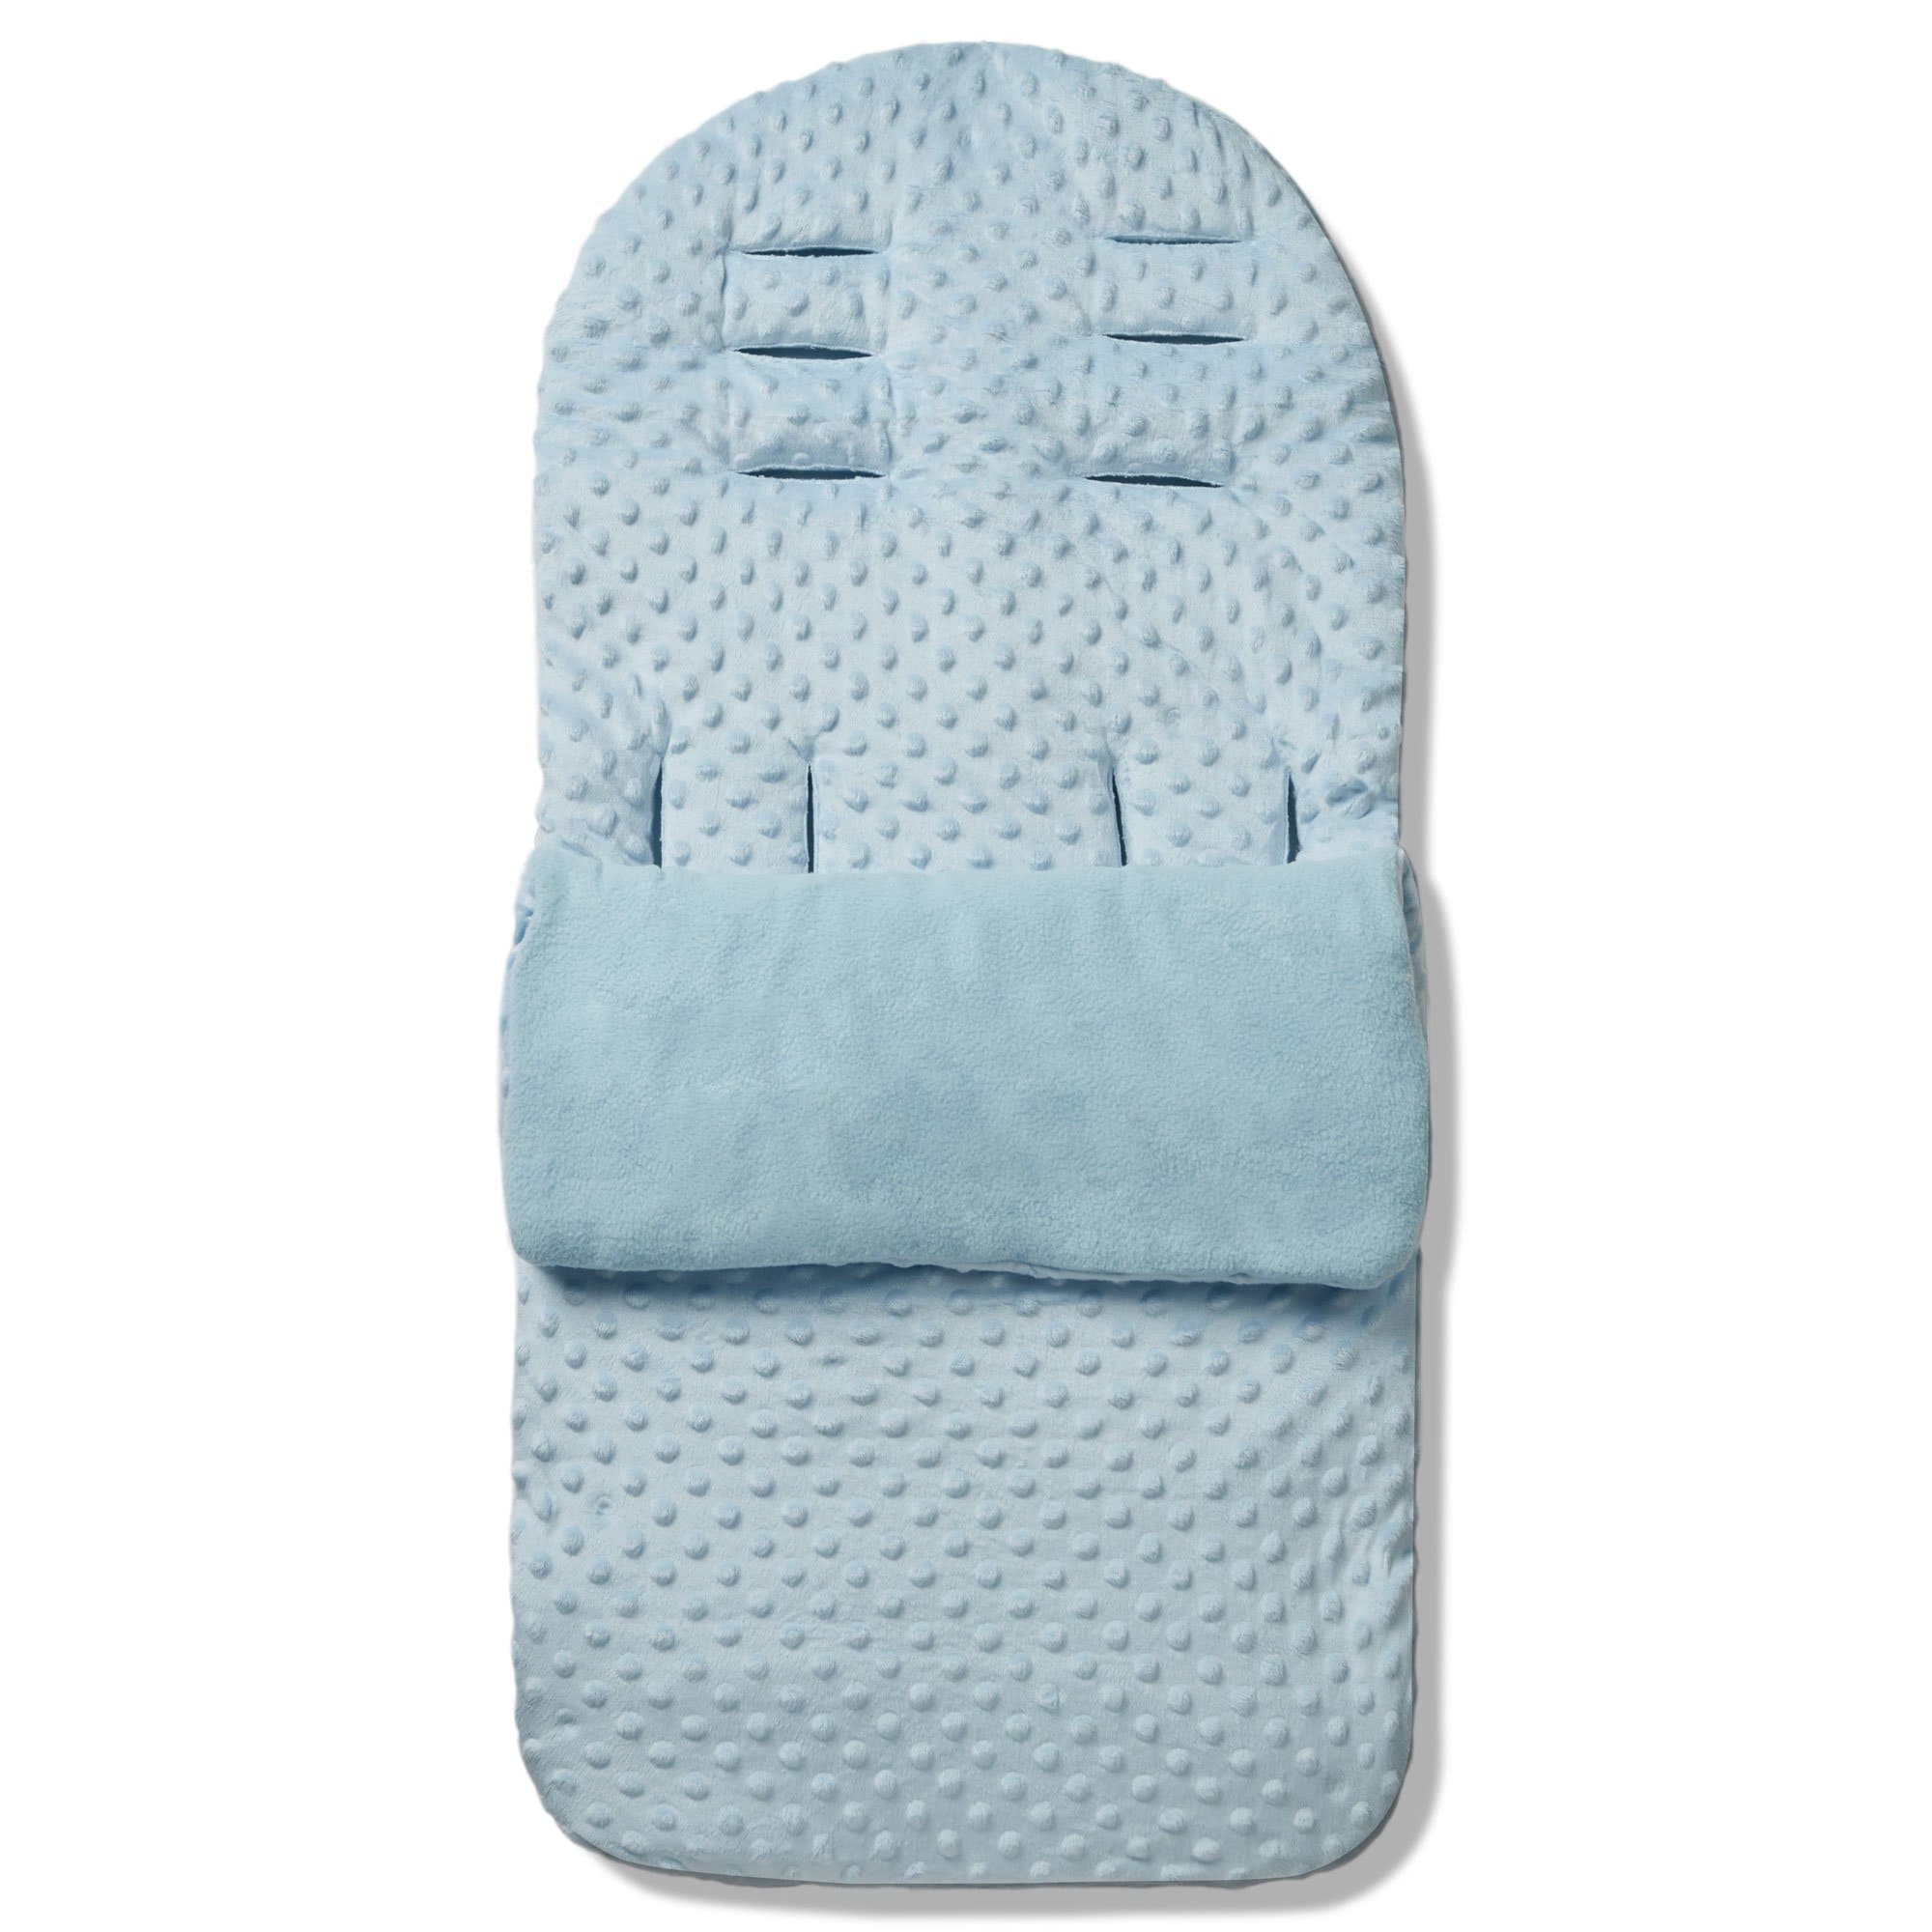 Dimple Footmuff / Cosy Toes Compatible with Quinny - Blue / Fits All Models | For Your Little One